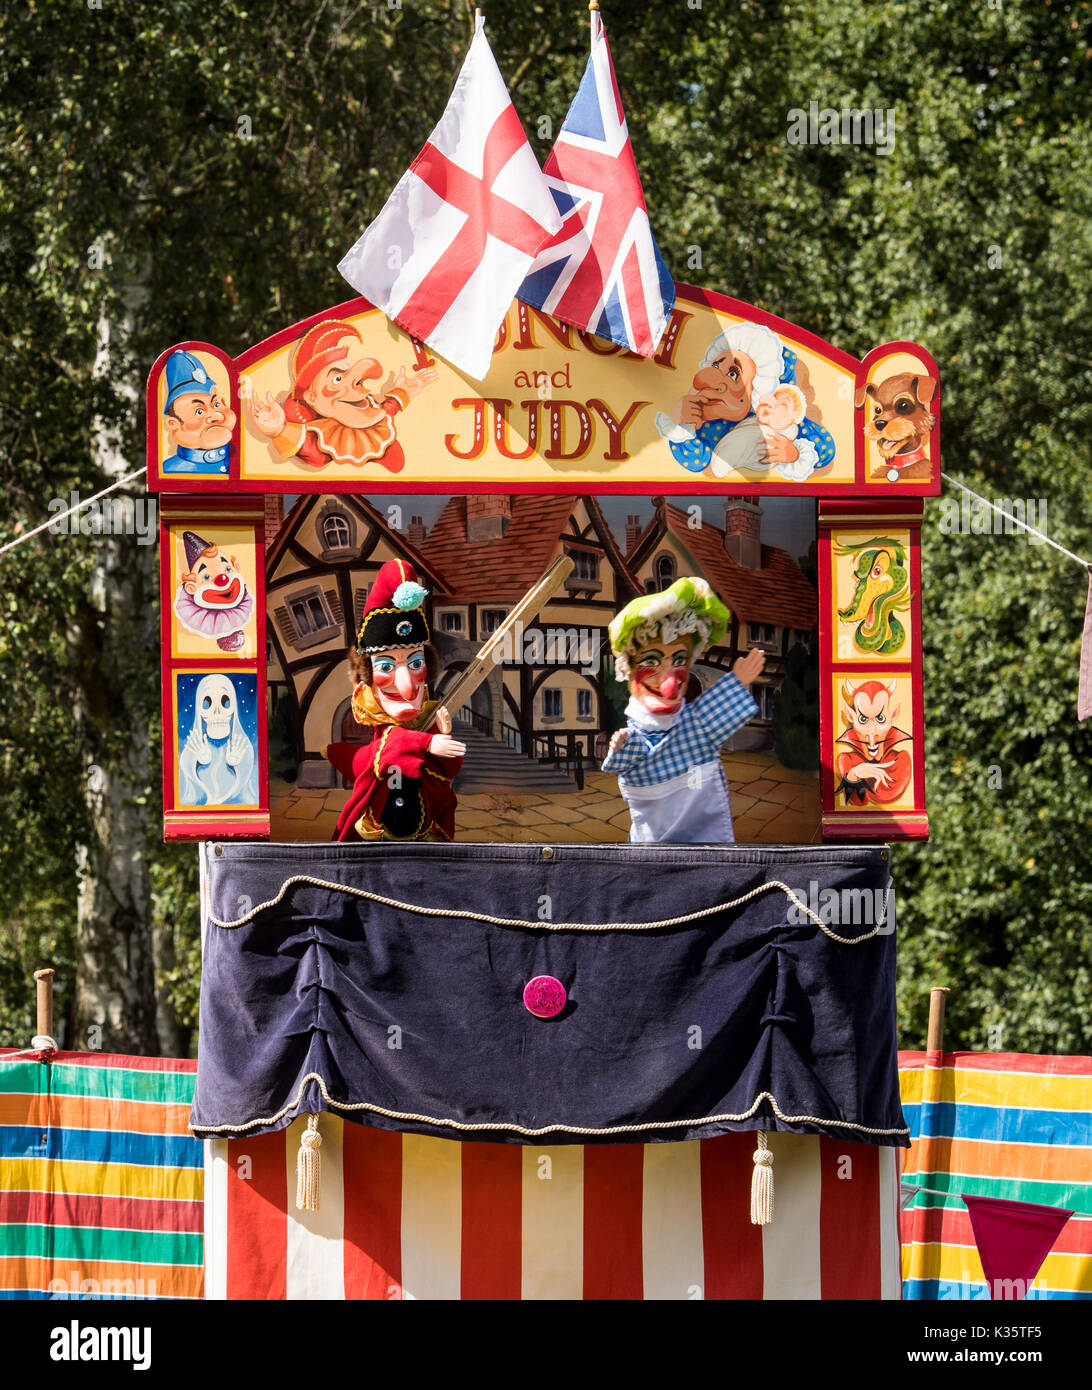 a traditional Punch and Judy show by David Wilde in an English park in the summer at Brentwood, Essex with the Mr Punch and Judy puppets Stock Photo